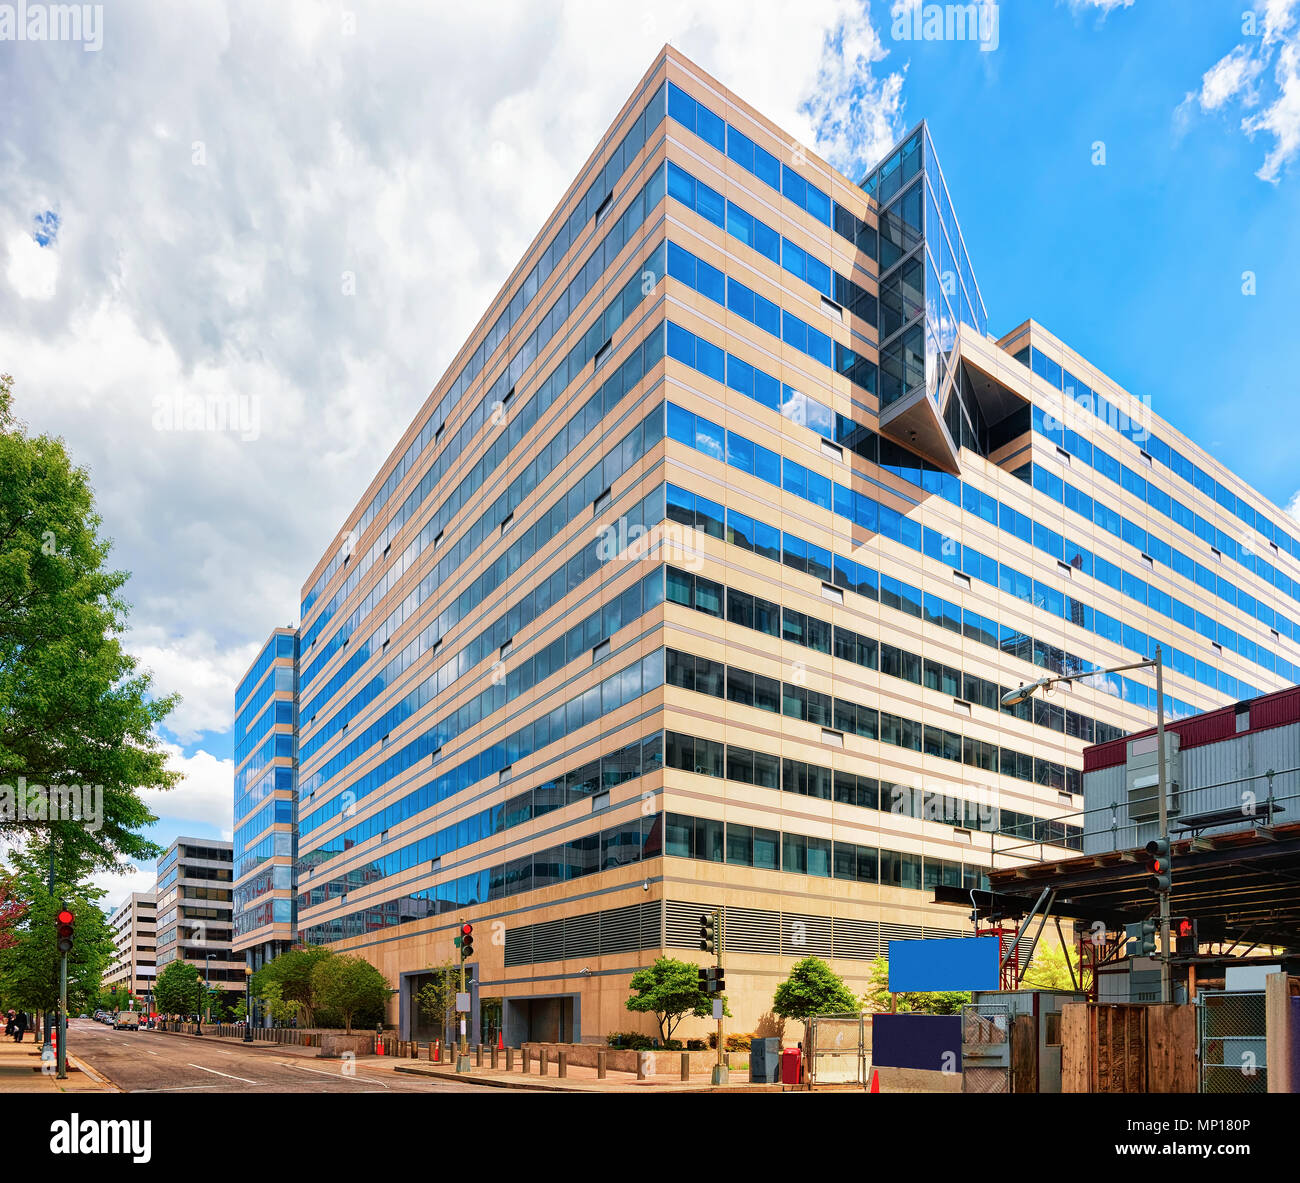 International monetary fund building in Washington D.C., USA. It was renamed after Herbert Hoover who was Secretary of Commerce and later President. Stock Photo